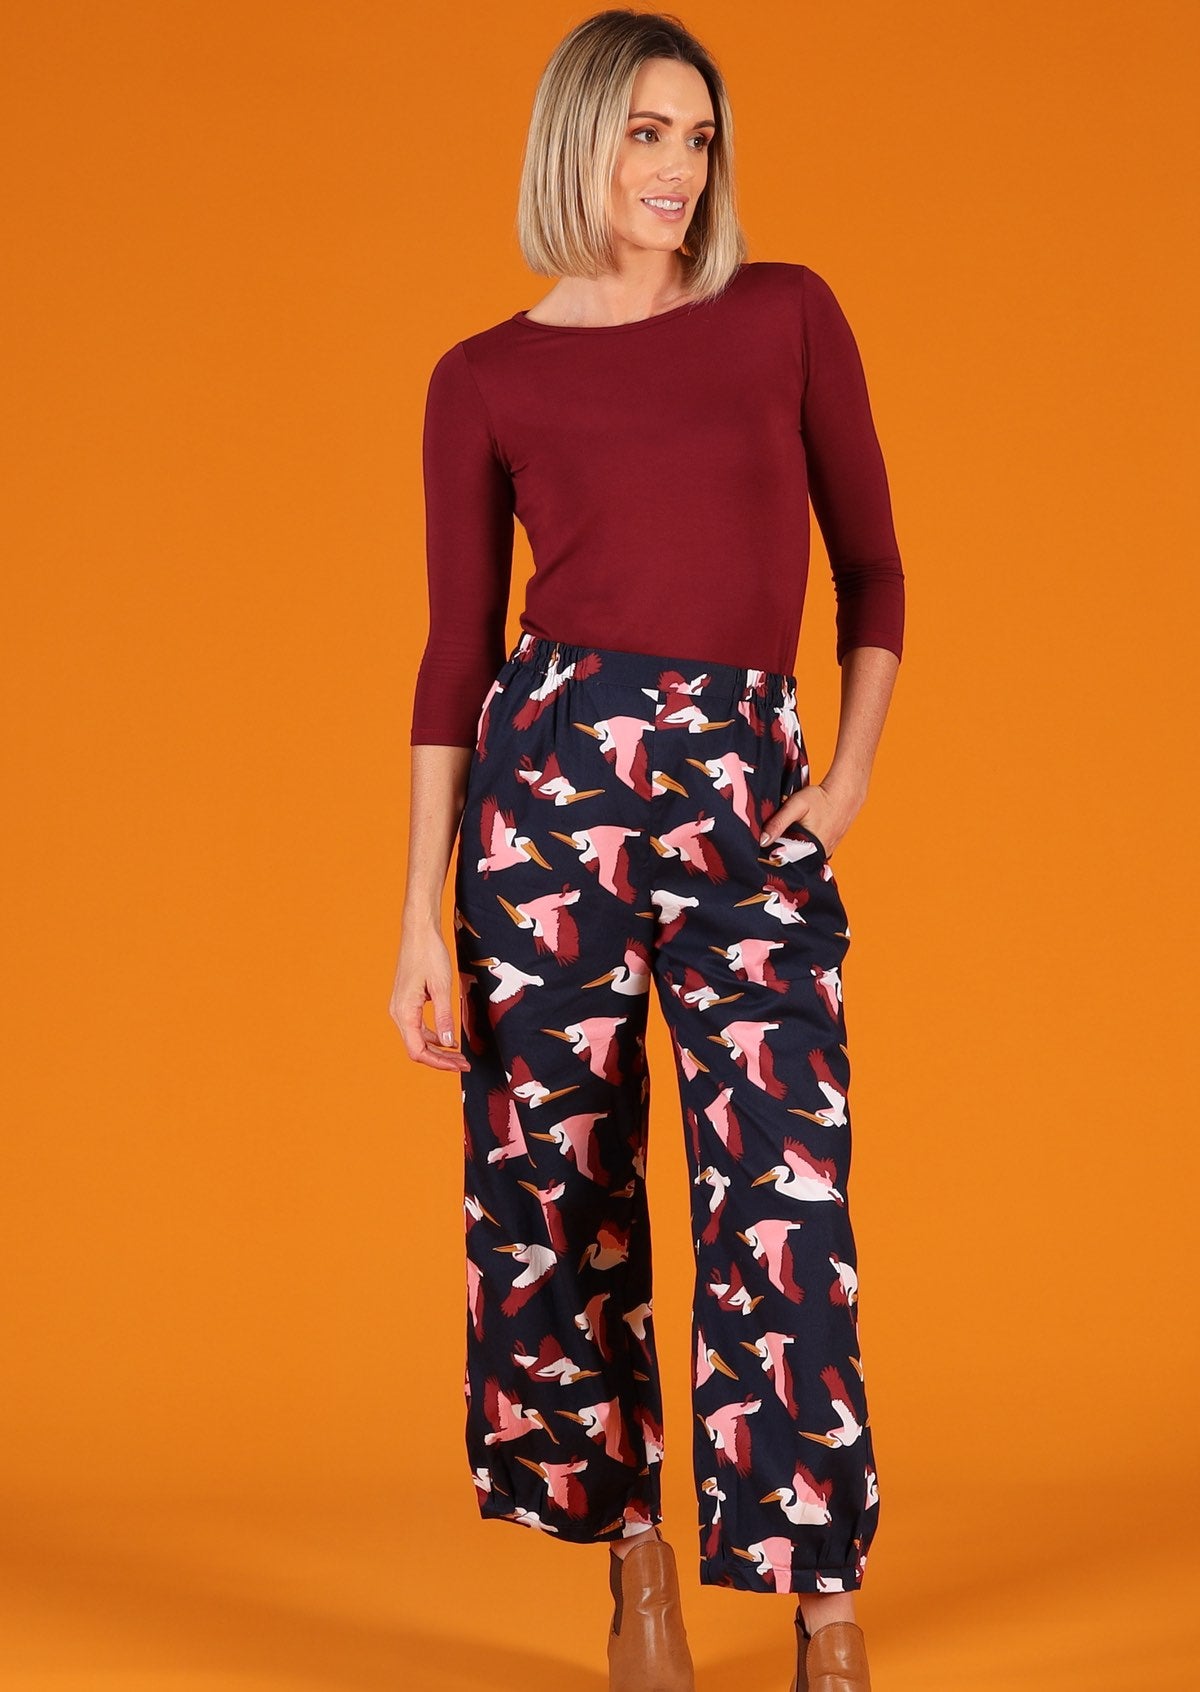 Greta Pants high waisted women's pants elasticated waistband side pockets pleats at side of ankles 100% cotton dark blue base with pink and maroon bird print | Karma East Australia